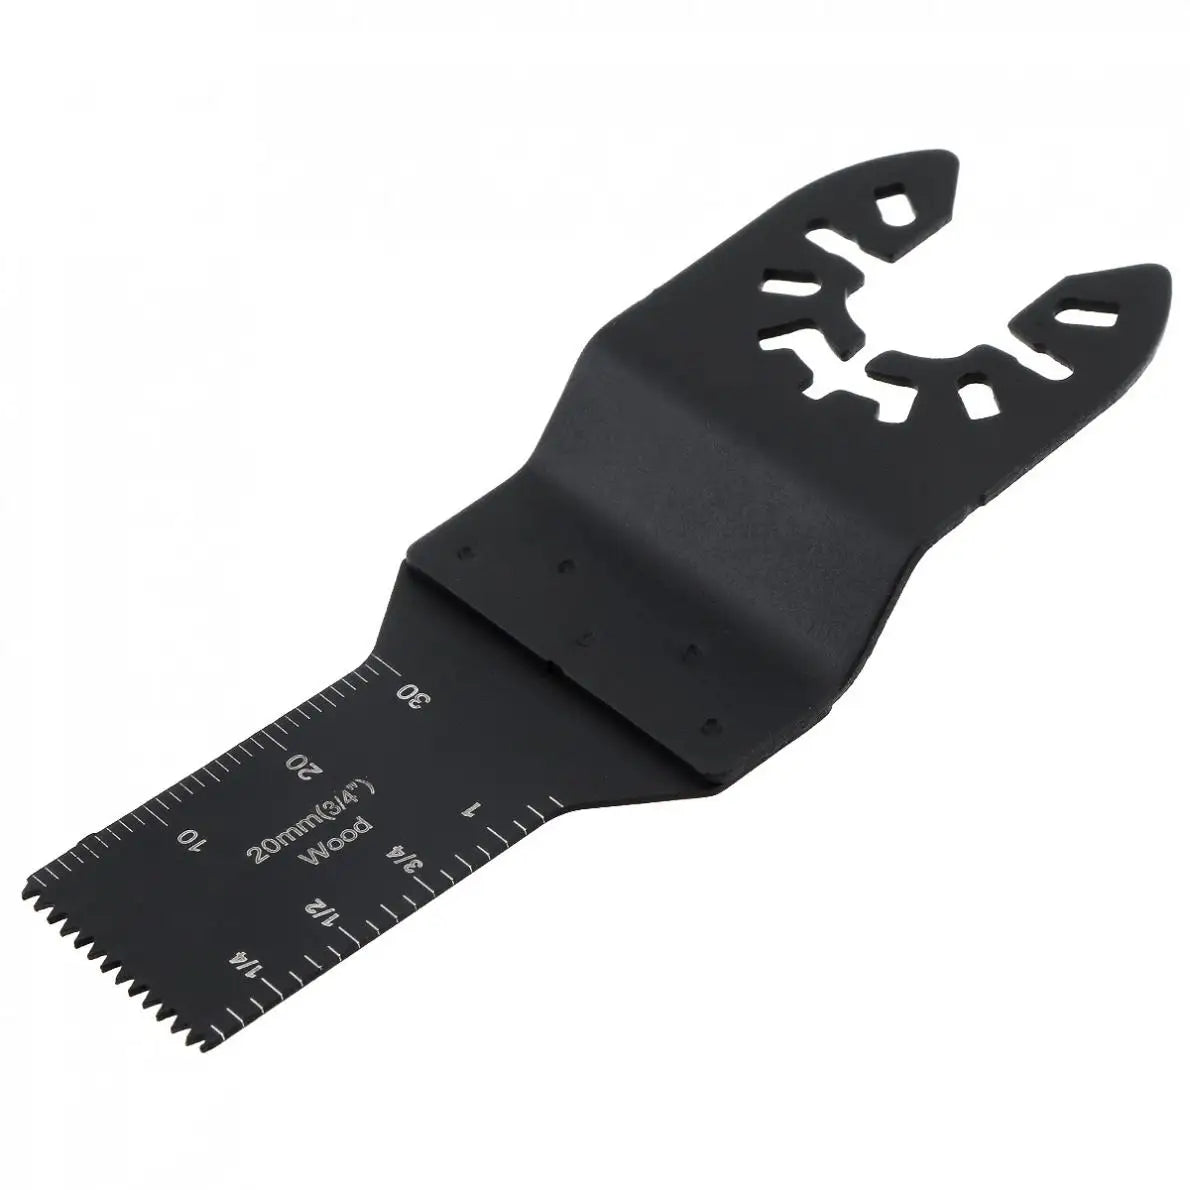 20mm Black Reciprocating Tungsten Steel Saw Blade Power Tool Accessories